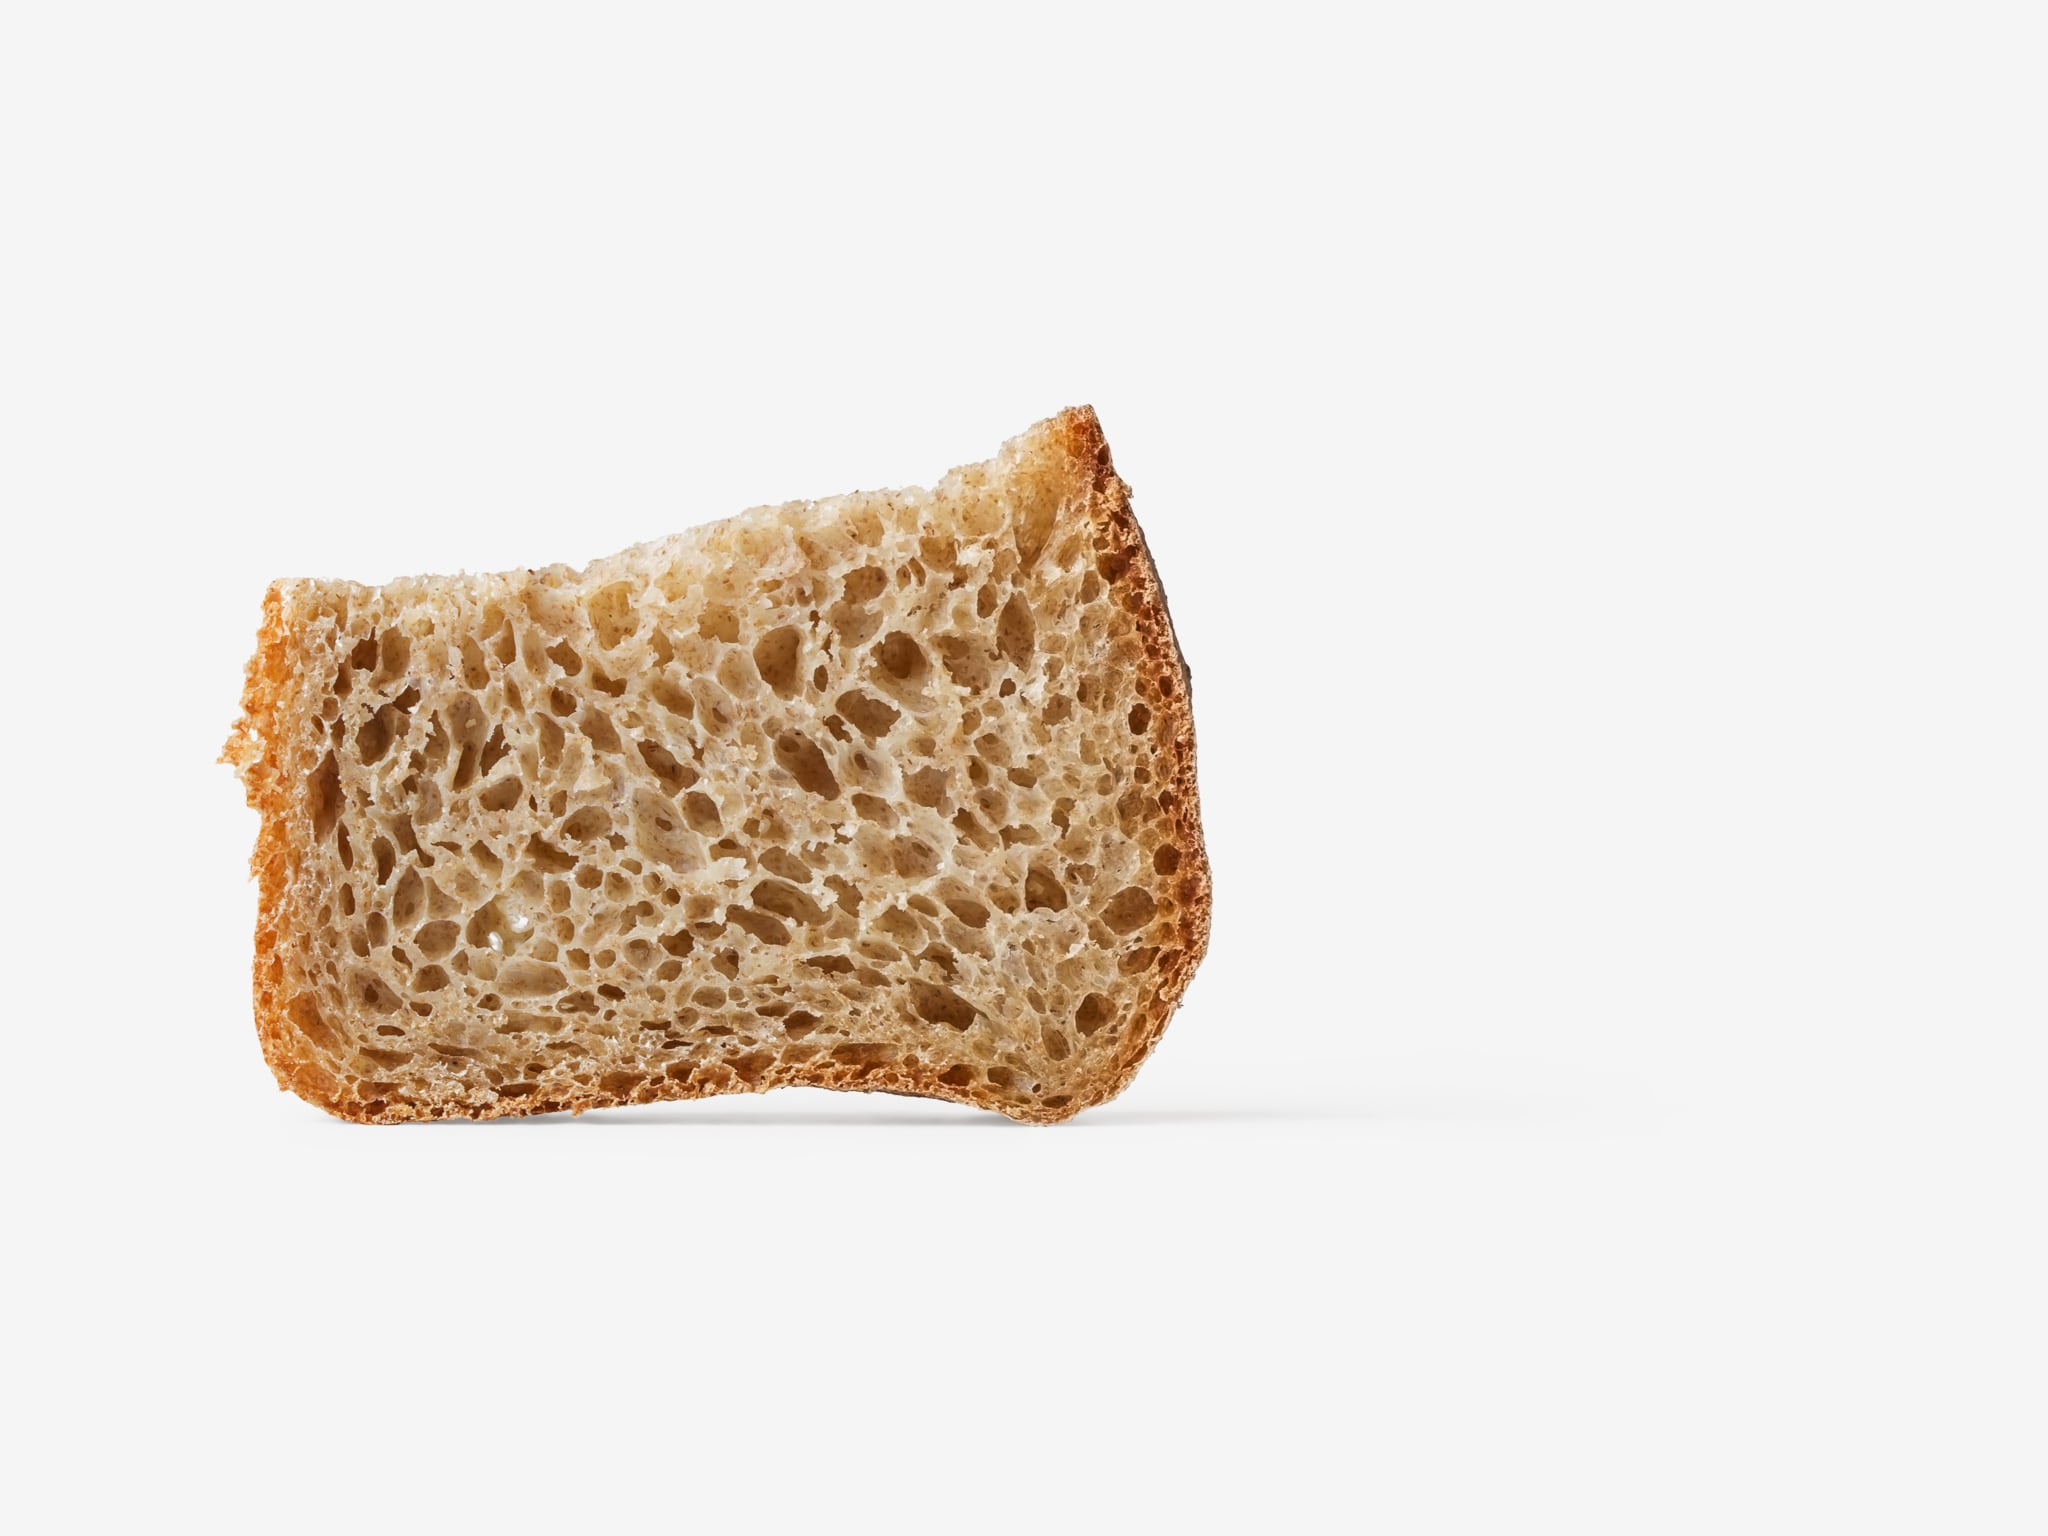 Bread PSD image with transparent background